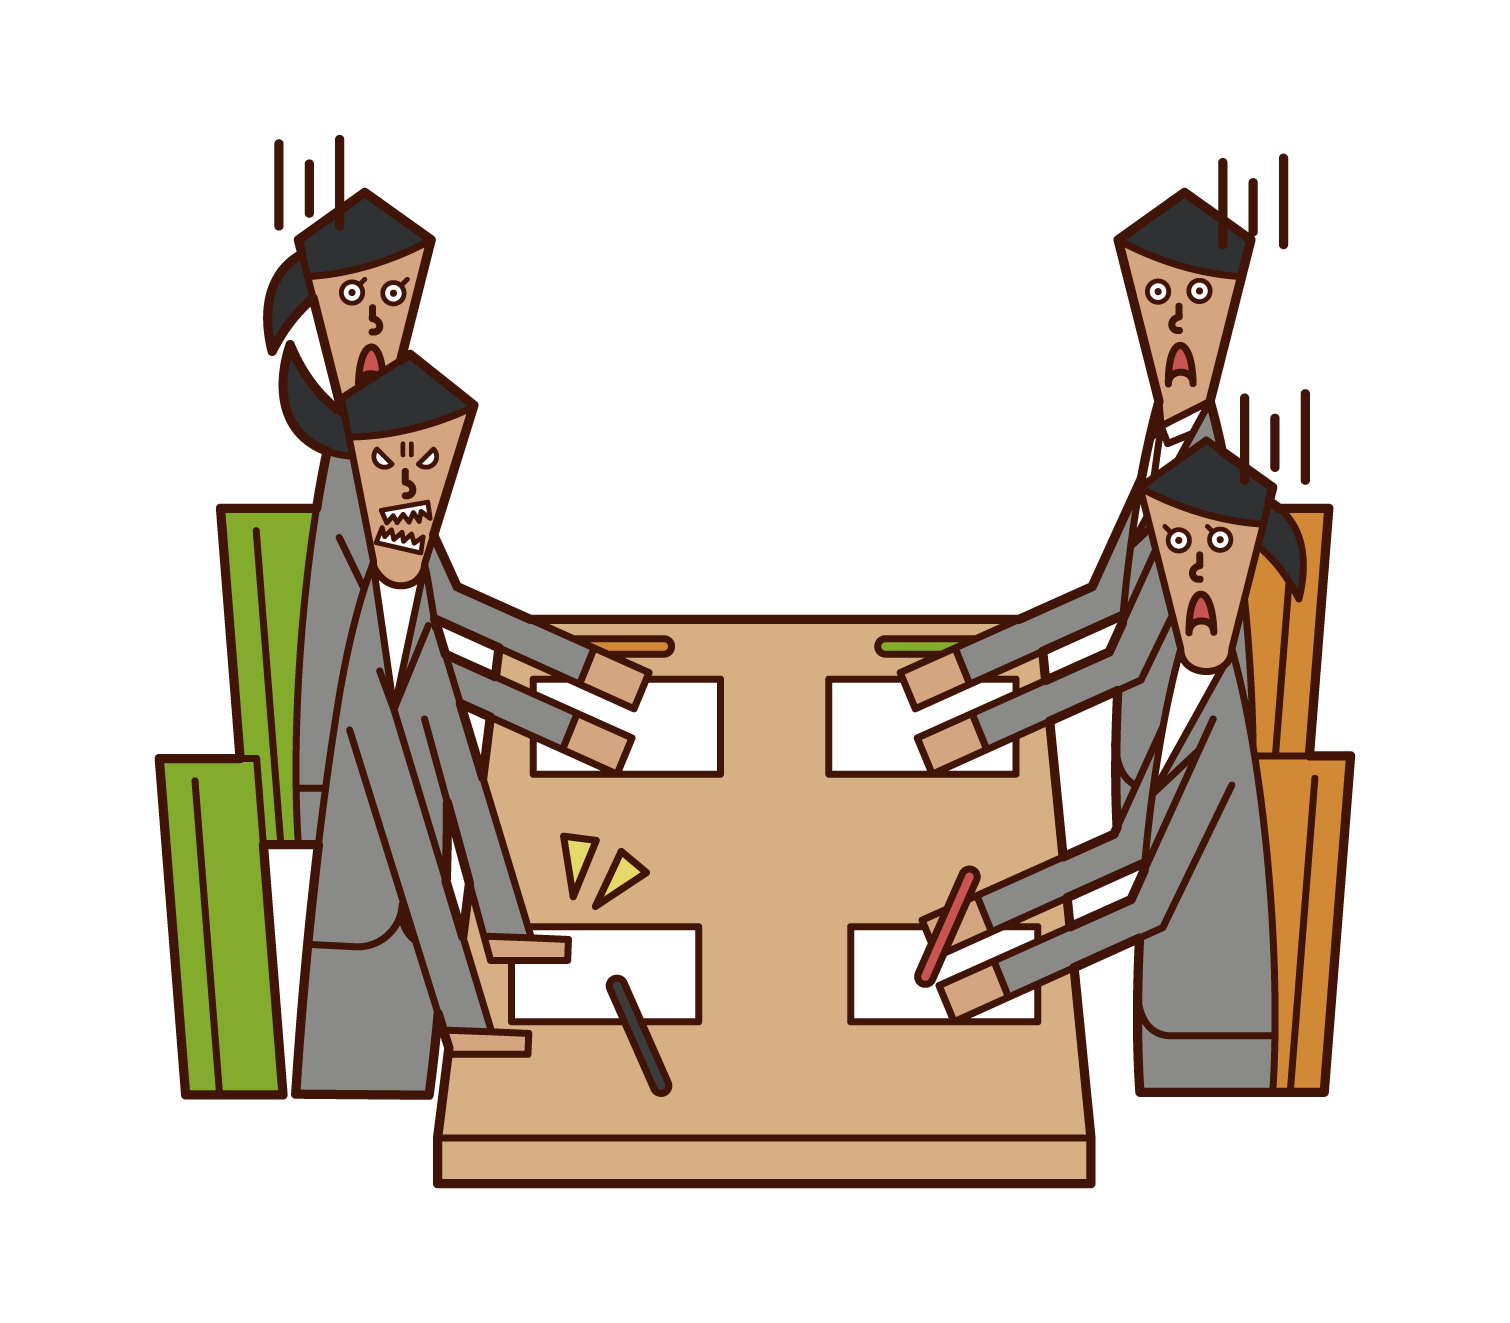 Illustration of a woman angry at a meeting